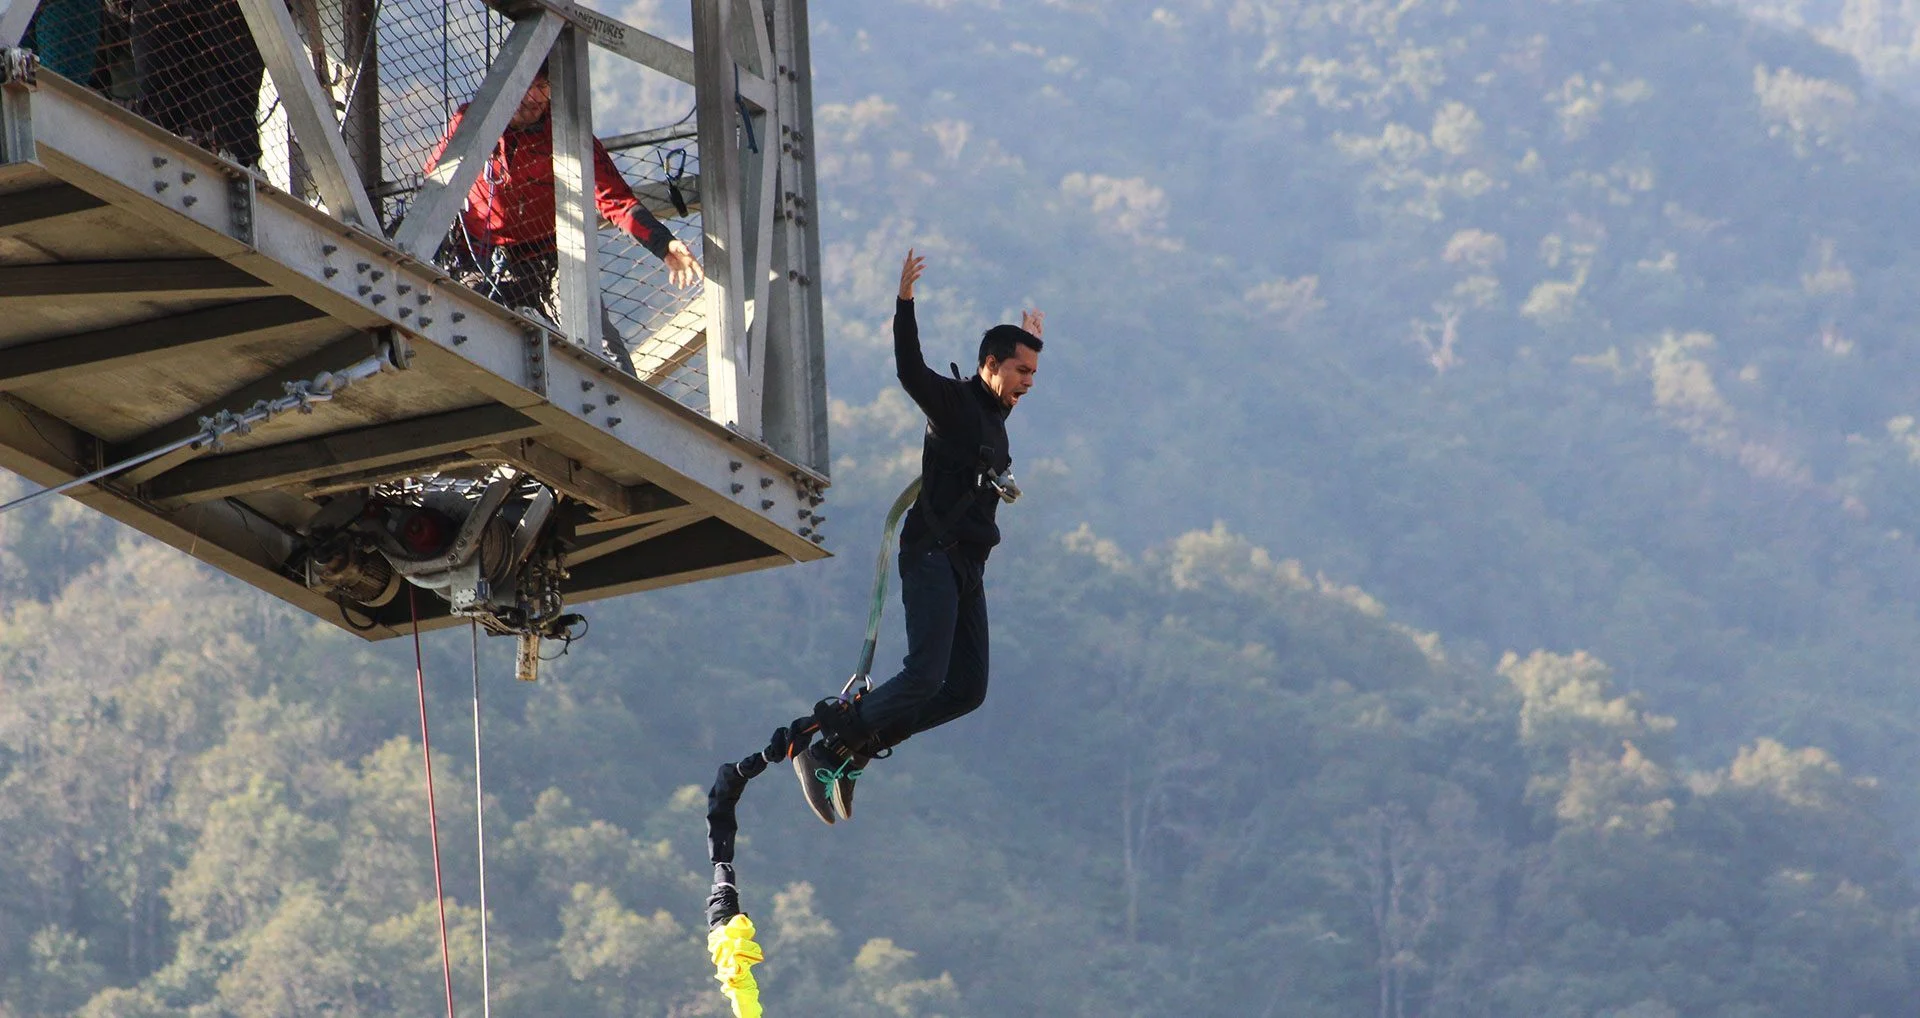 Nazmul Ahmed bunjee jumping